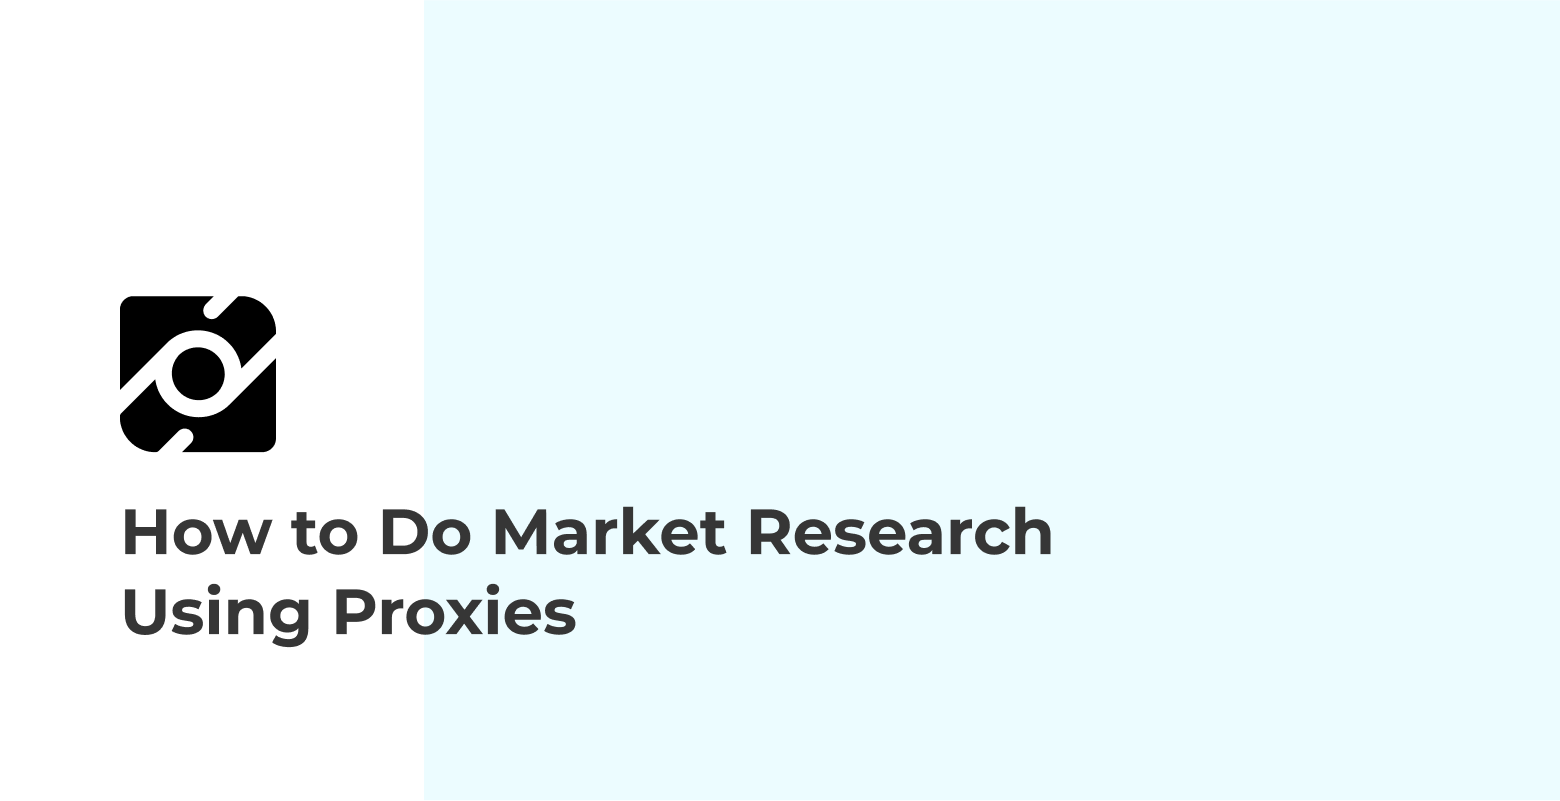 How to Do Market Research Using Proxies